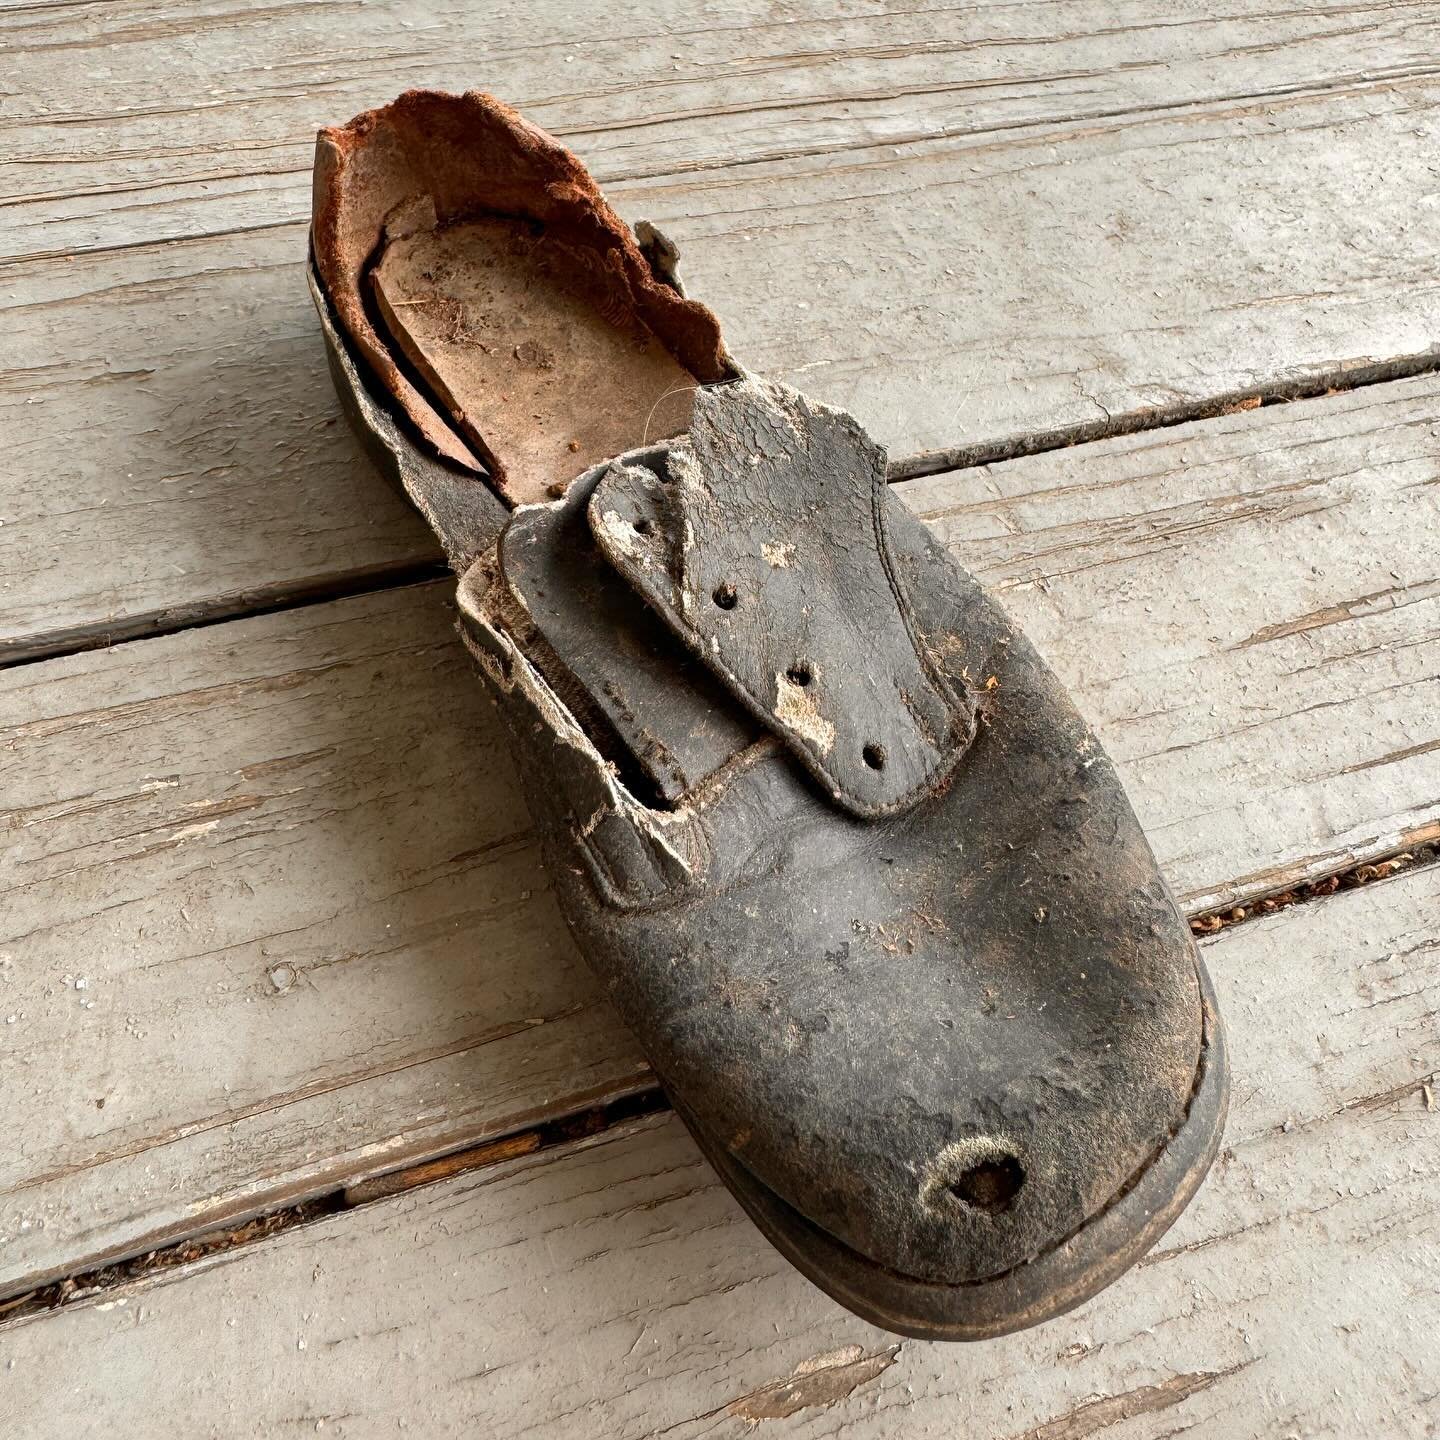 Found this little shoe under a board in the attic today! We will have it displayed in the shop with all our other finds!

#901history #friendswoodhistory #friendswoodproud #friendswood